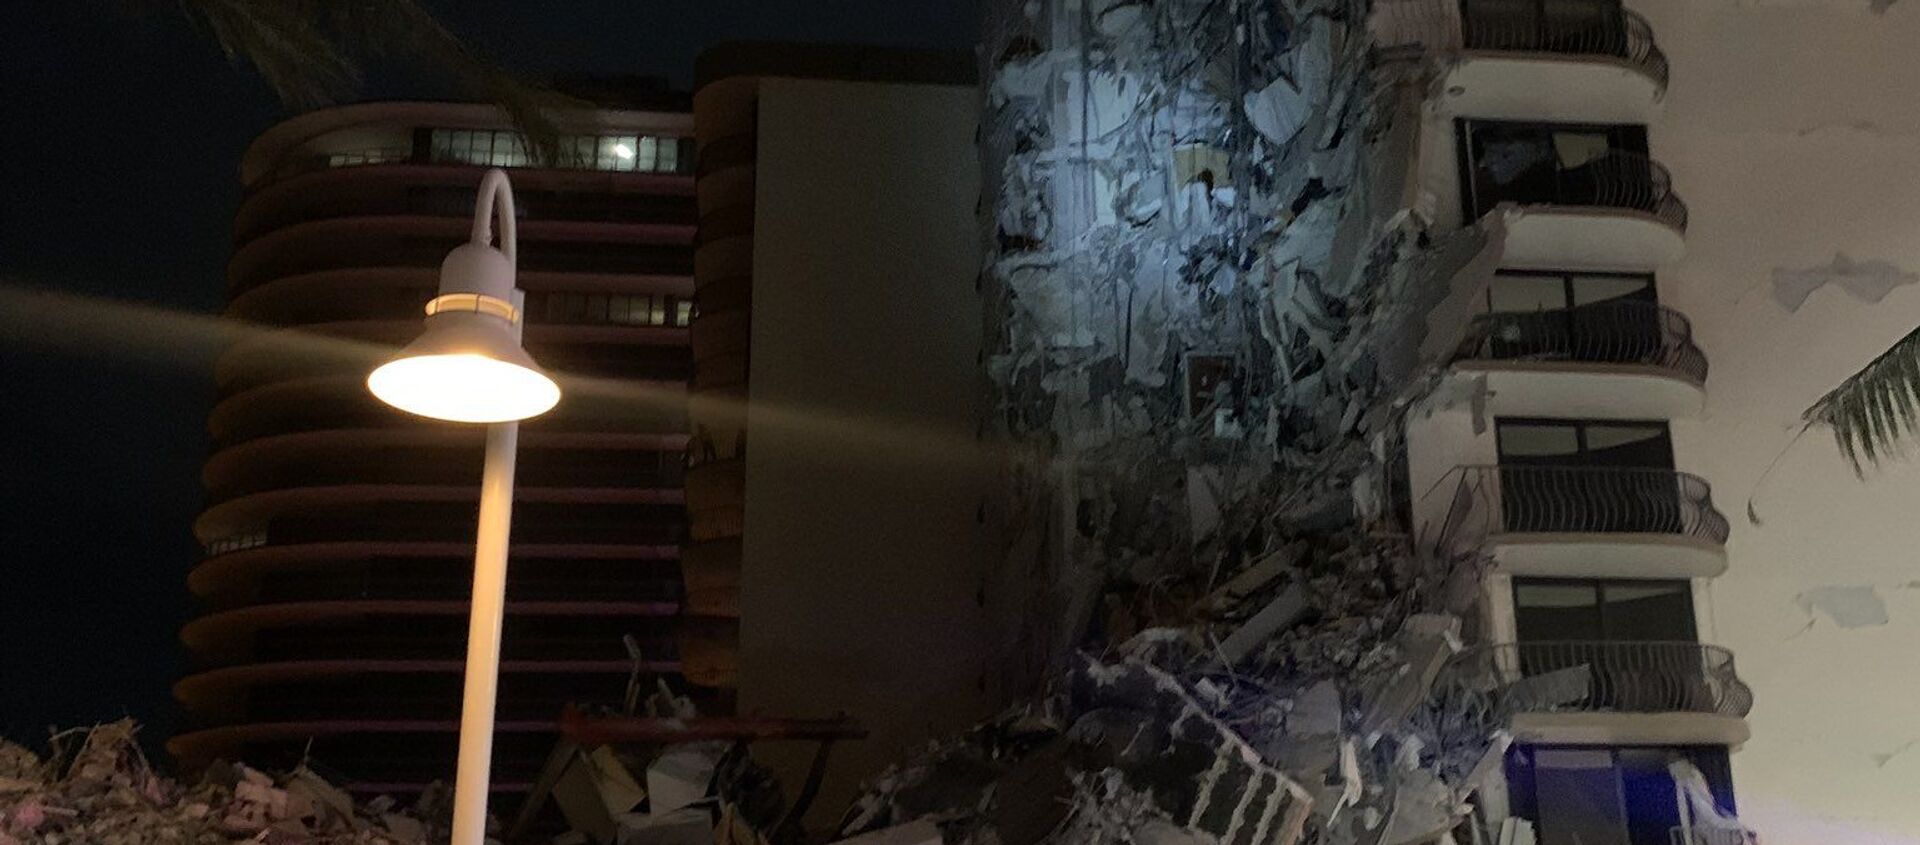 MBPD and  Miami Beach Fire  are assisting the Town of Surfside at a partial building collapse located at 8777 Collins Avenue in Surfside, Florida - Sputnik International, 1920, 24.06.2021